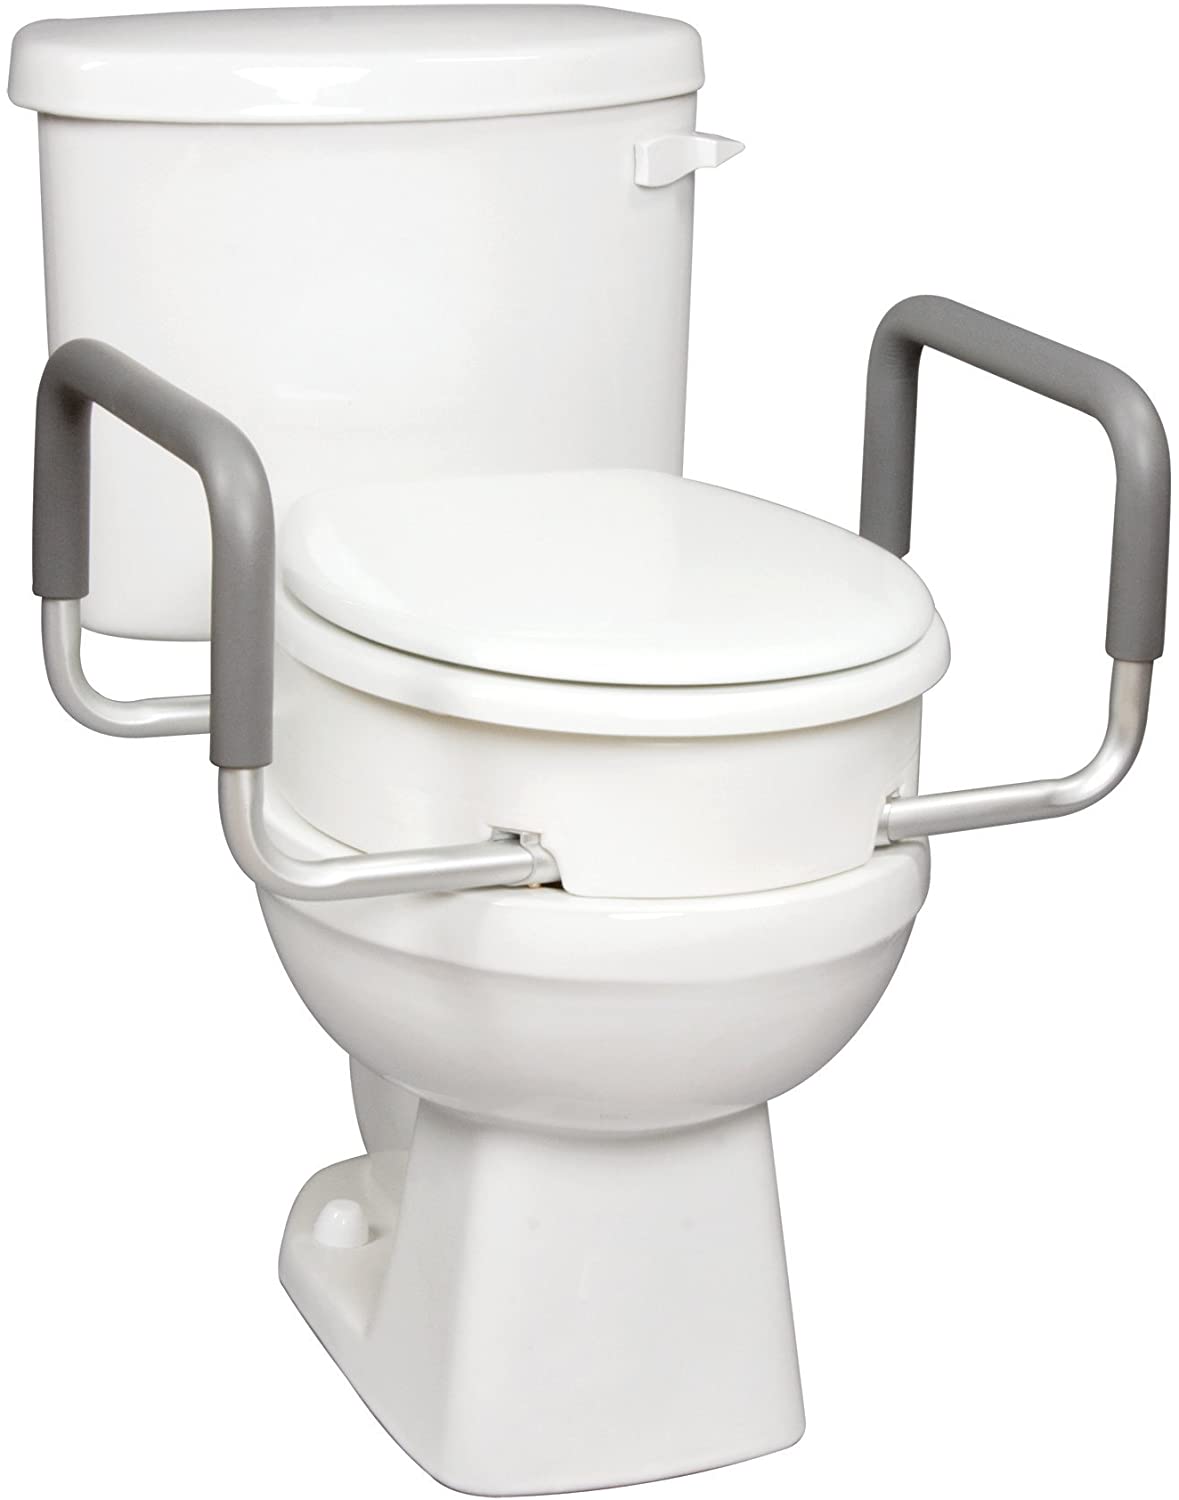 Raised toilet seat with arms